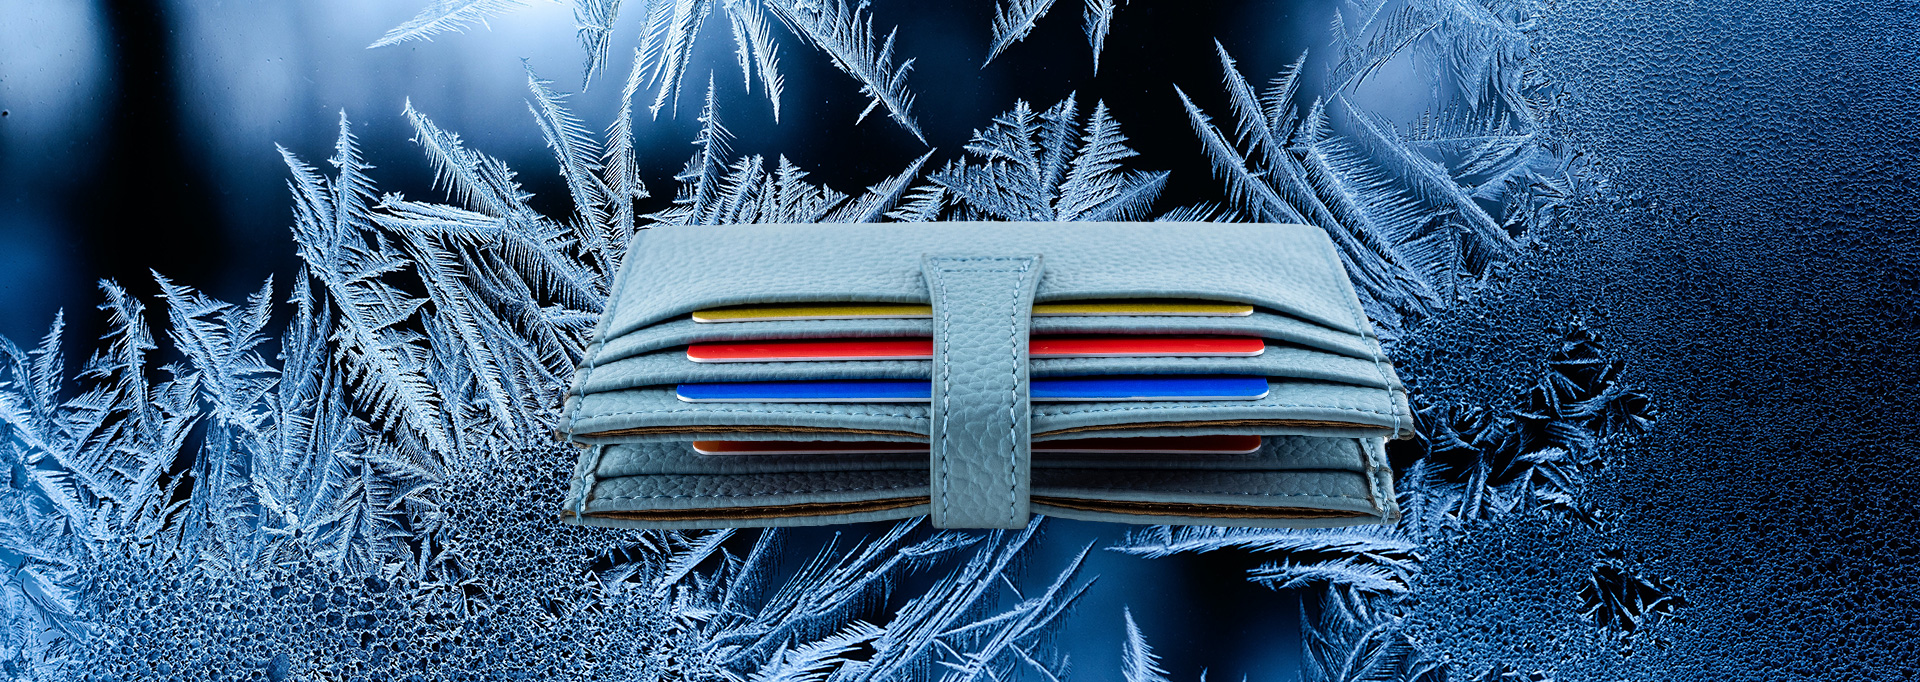 wallet on icy background